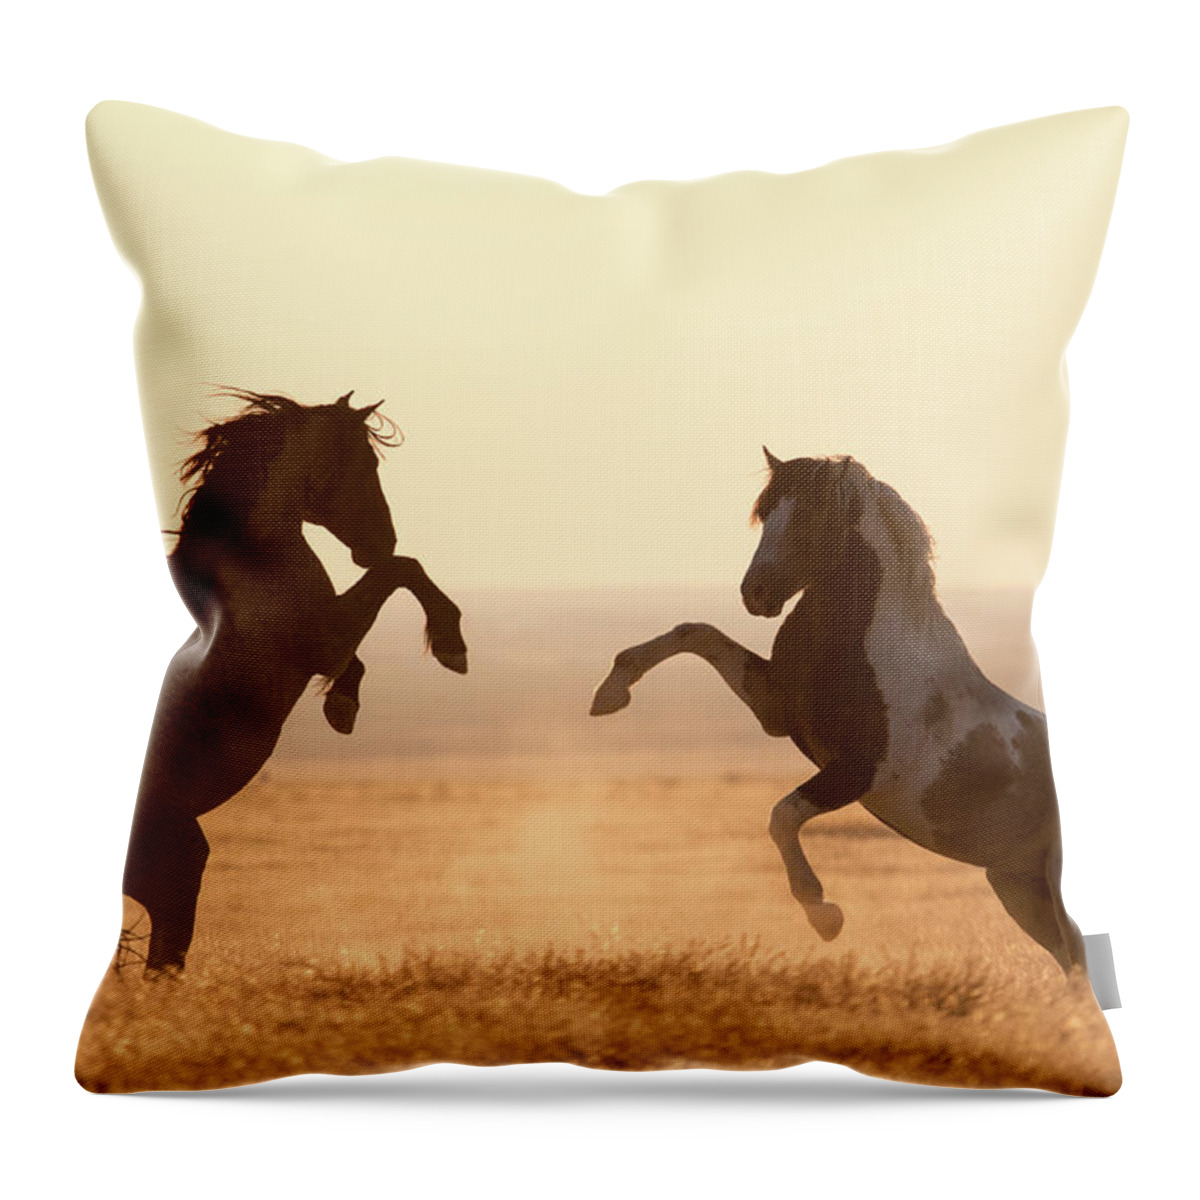 Wild Horses Throw Pillow featuring the photograph Wild Horses by Wesley Aston